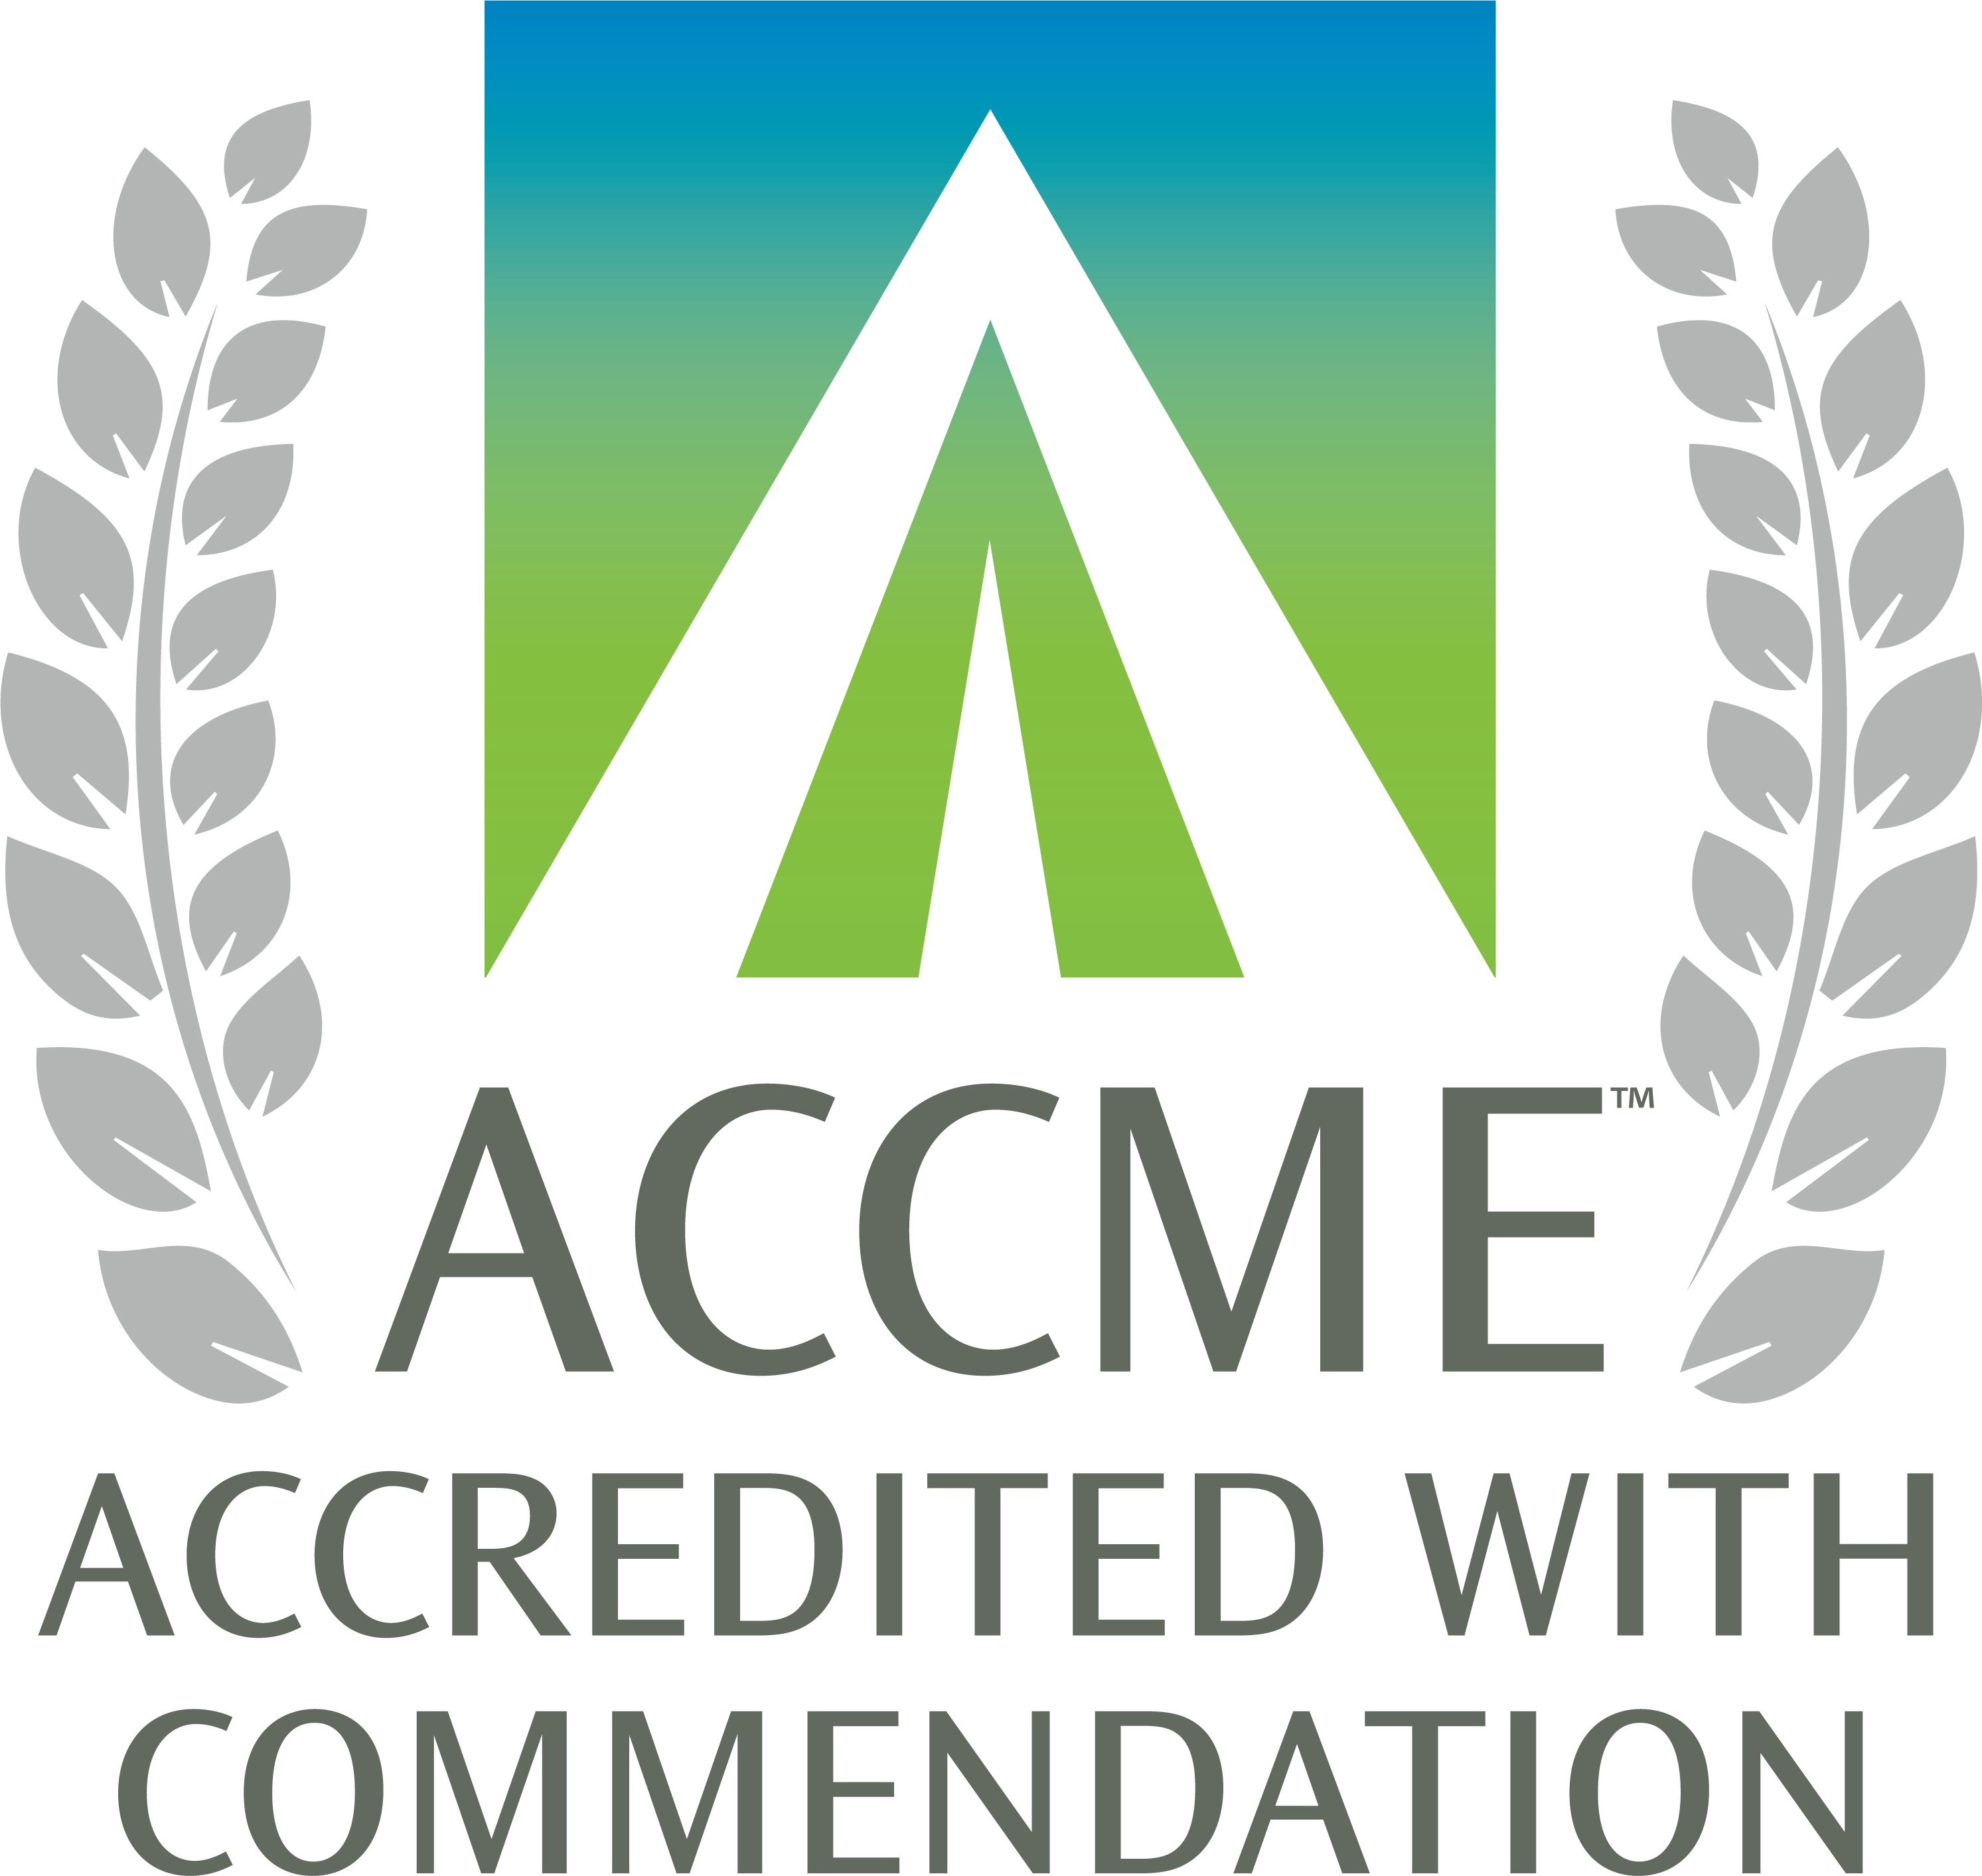 Global Earns ACCME Accreditation with Commendation